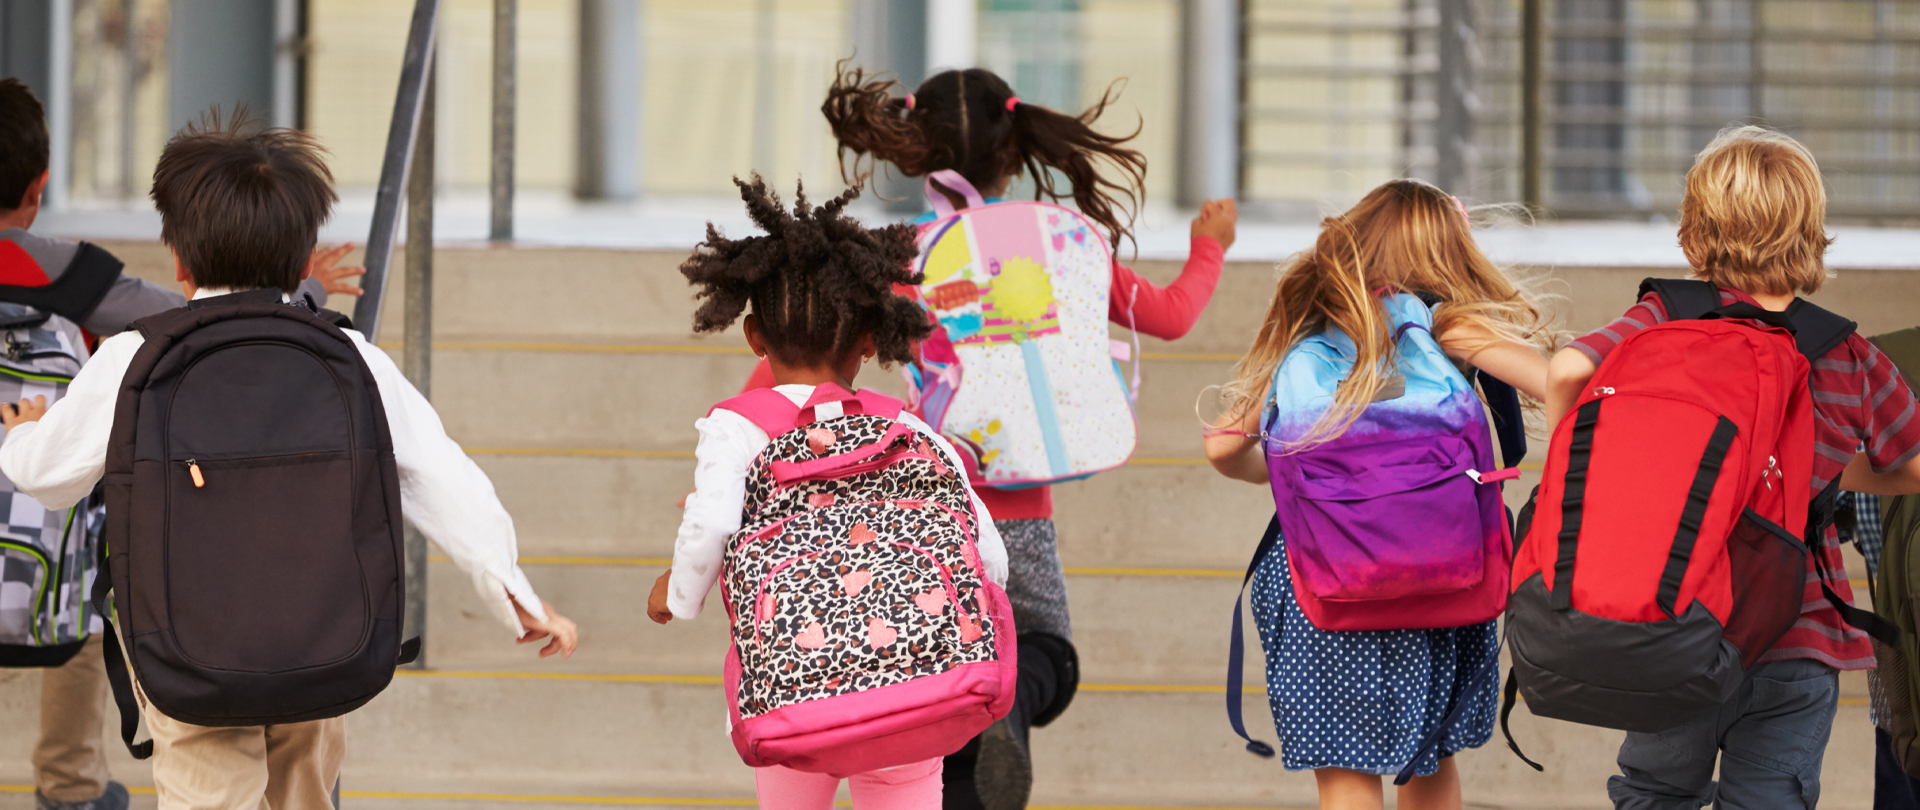 Backpack Drive for Kids
Drop off donations in the Galleria
Through August 22
